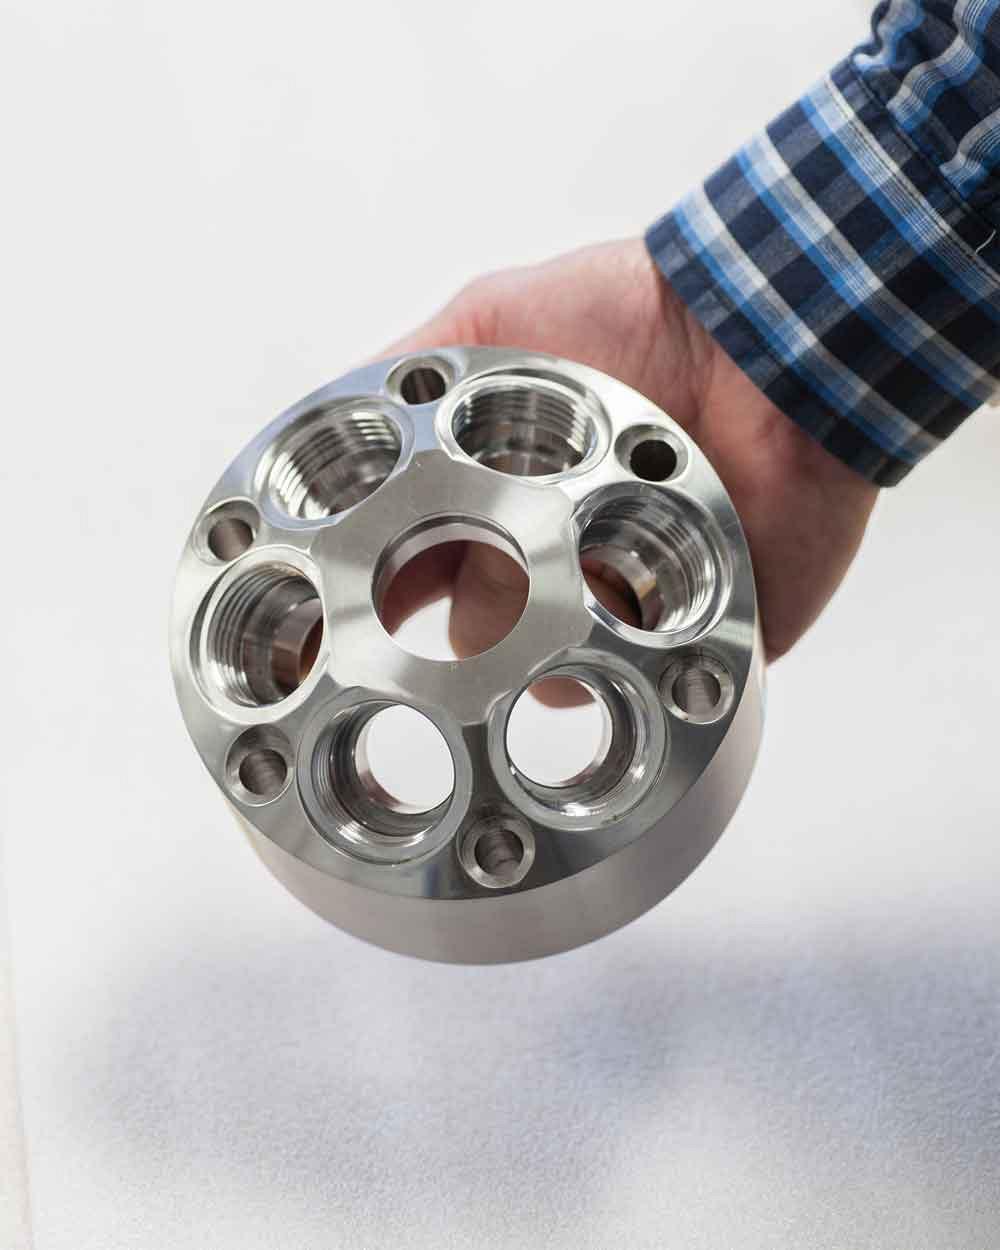 A complex fluid rotary component was machined from titanium.